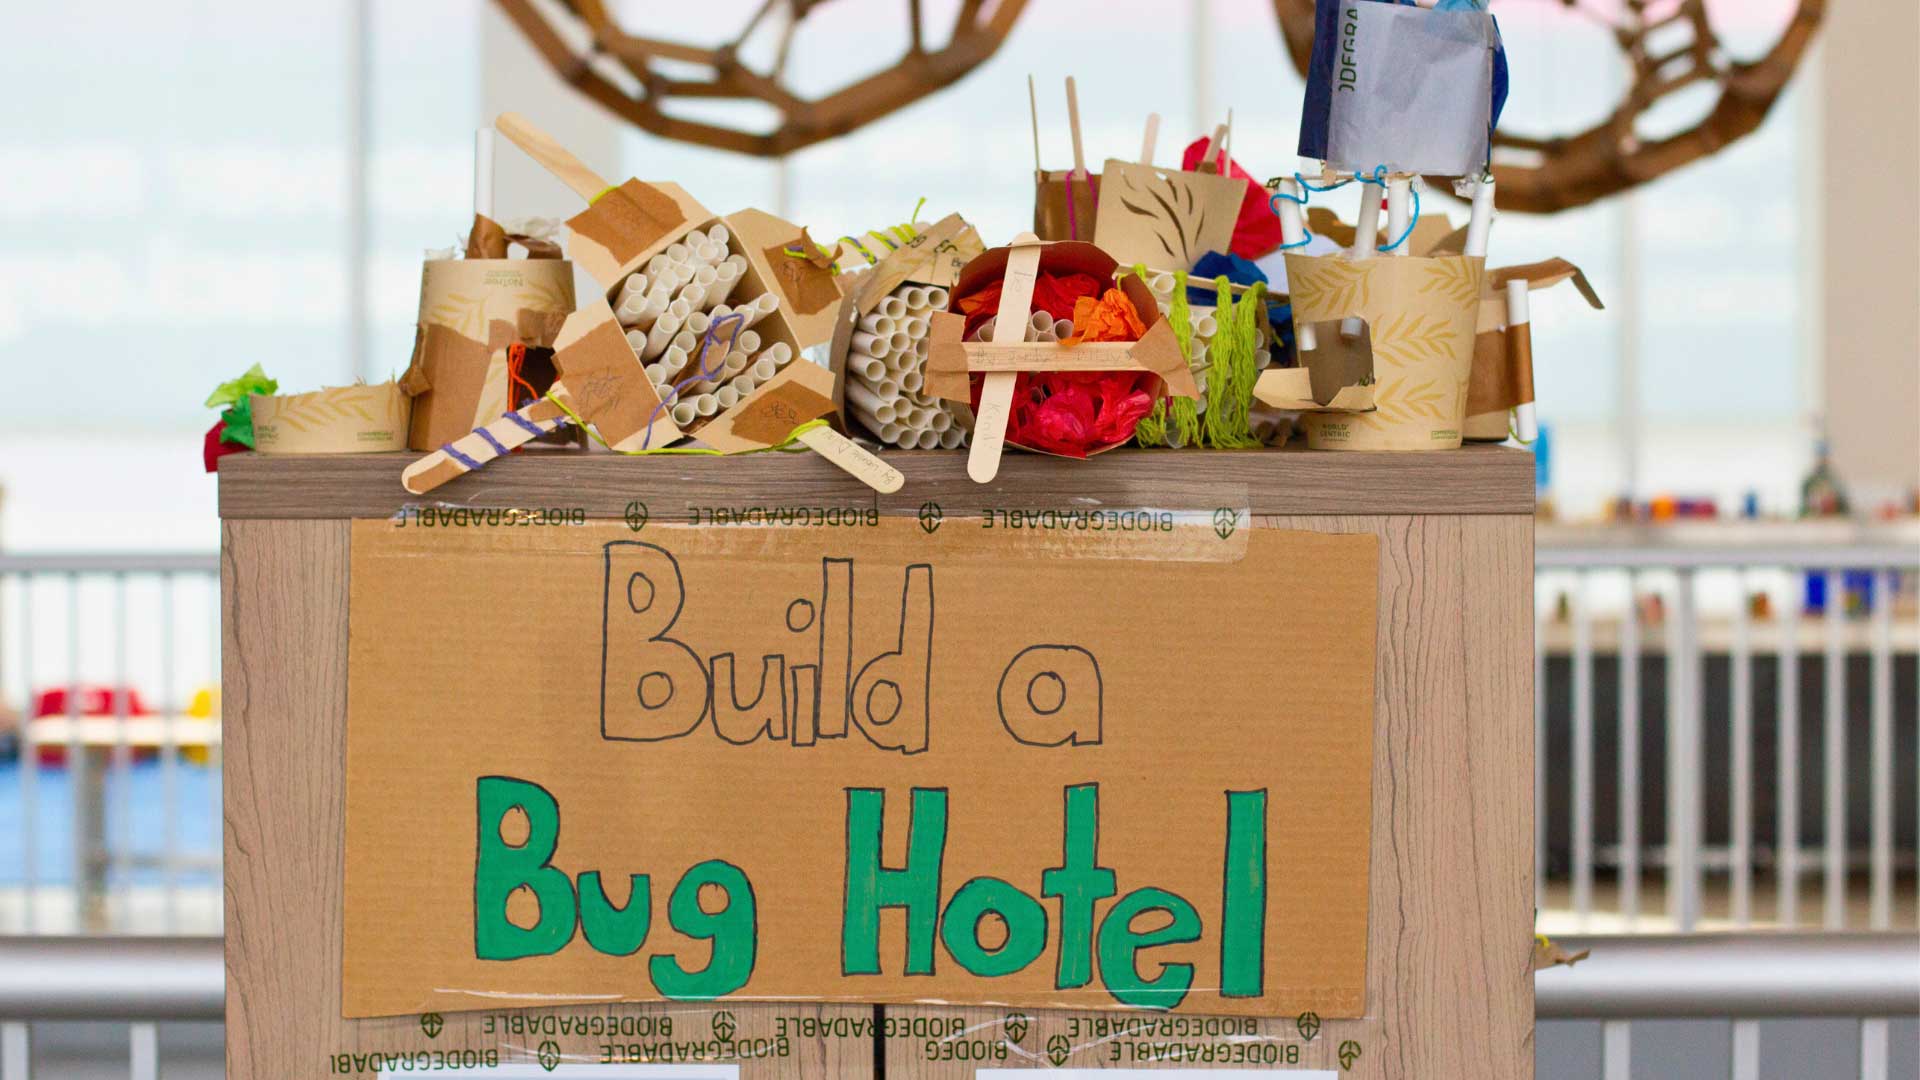 Cardboard with "Build a Bug Hotel" written on it